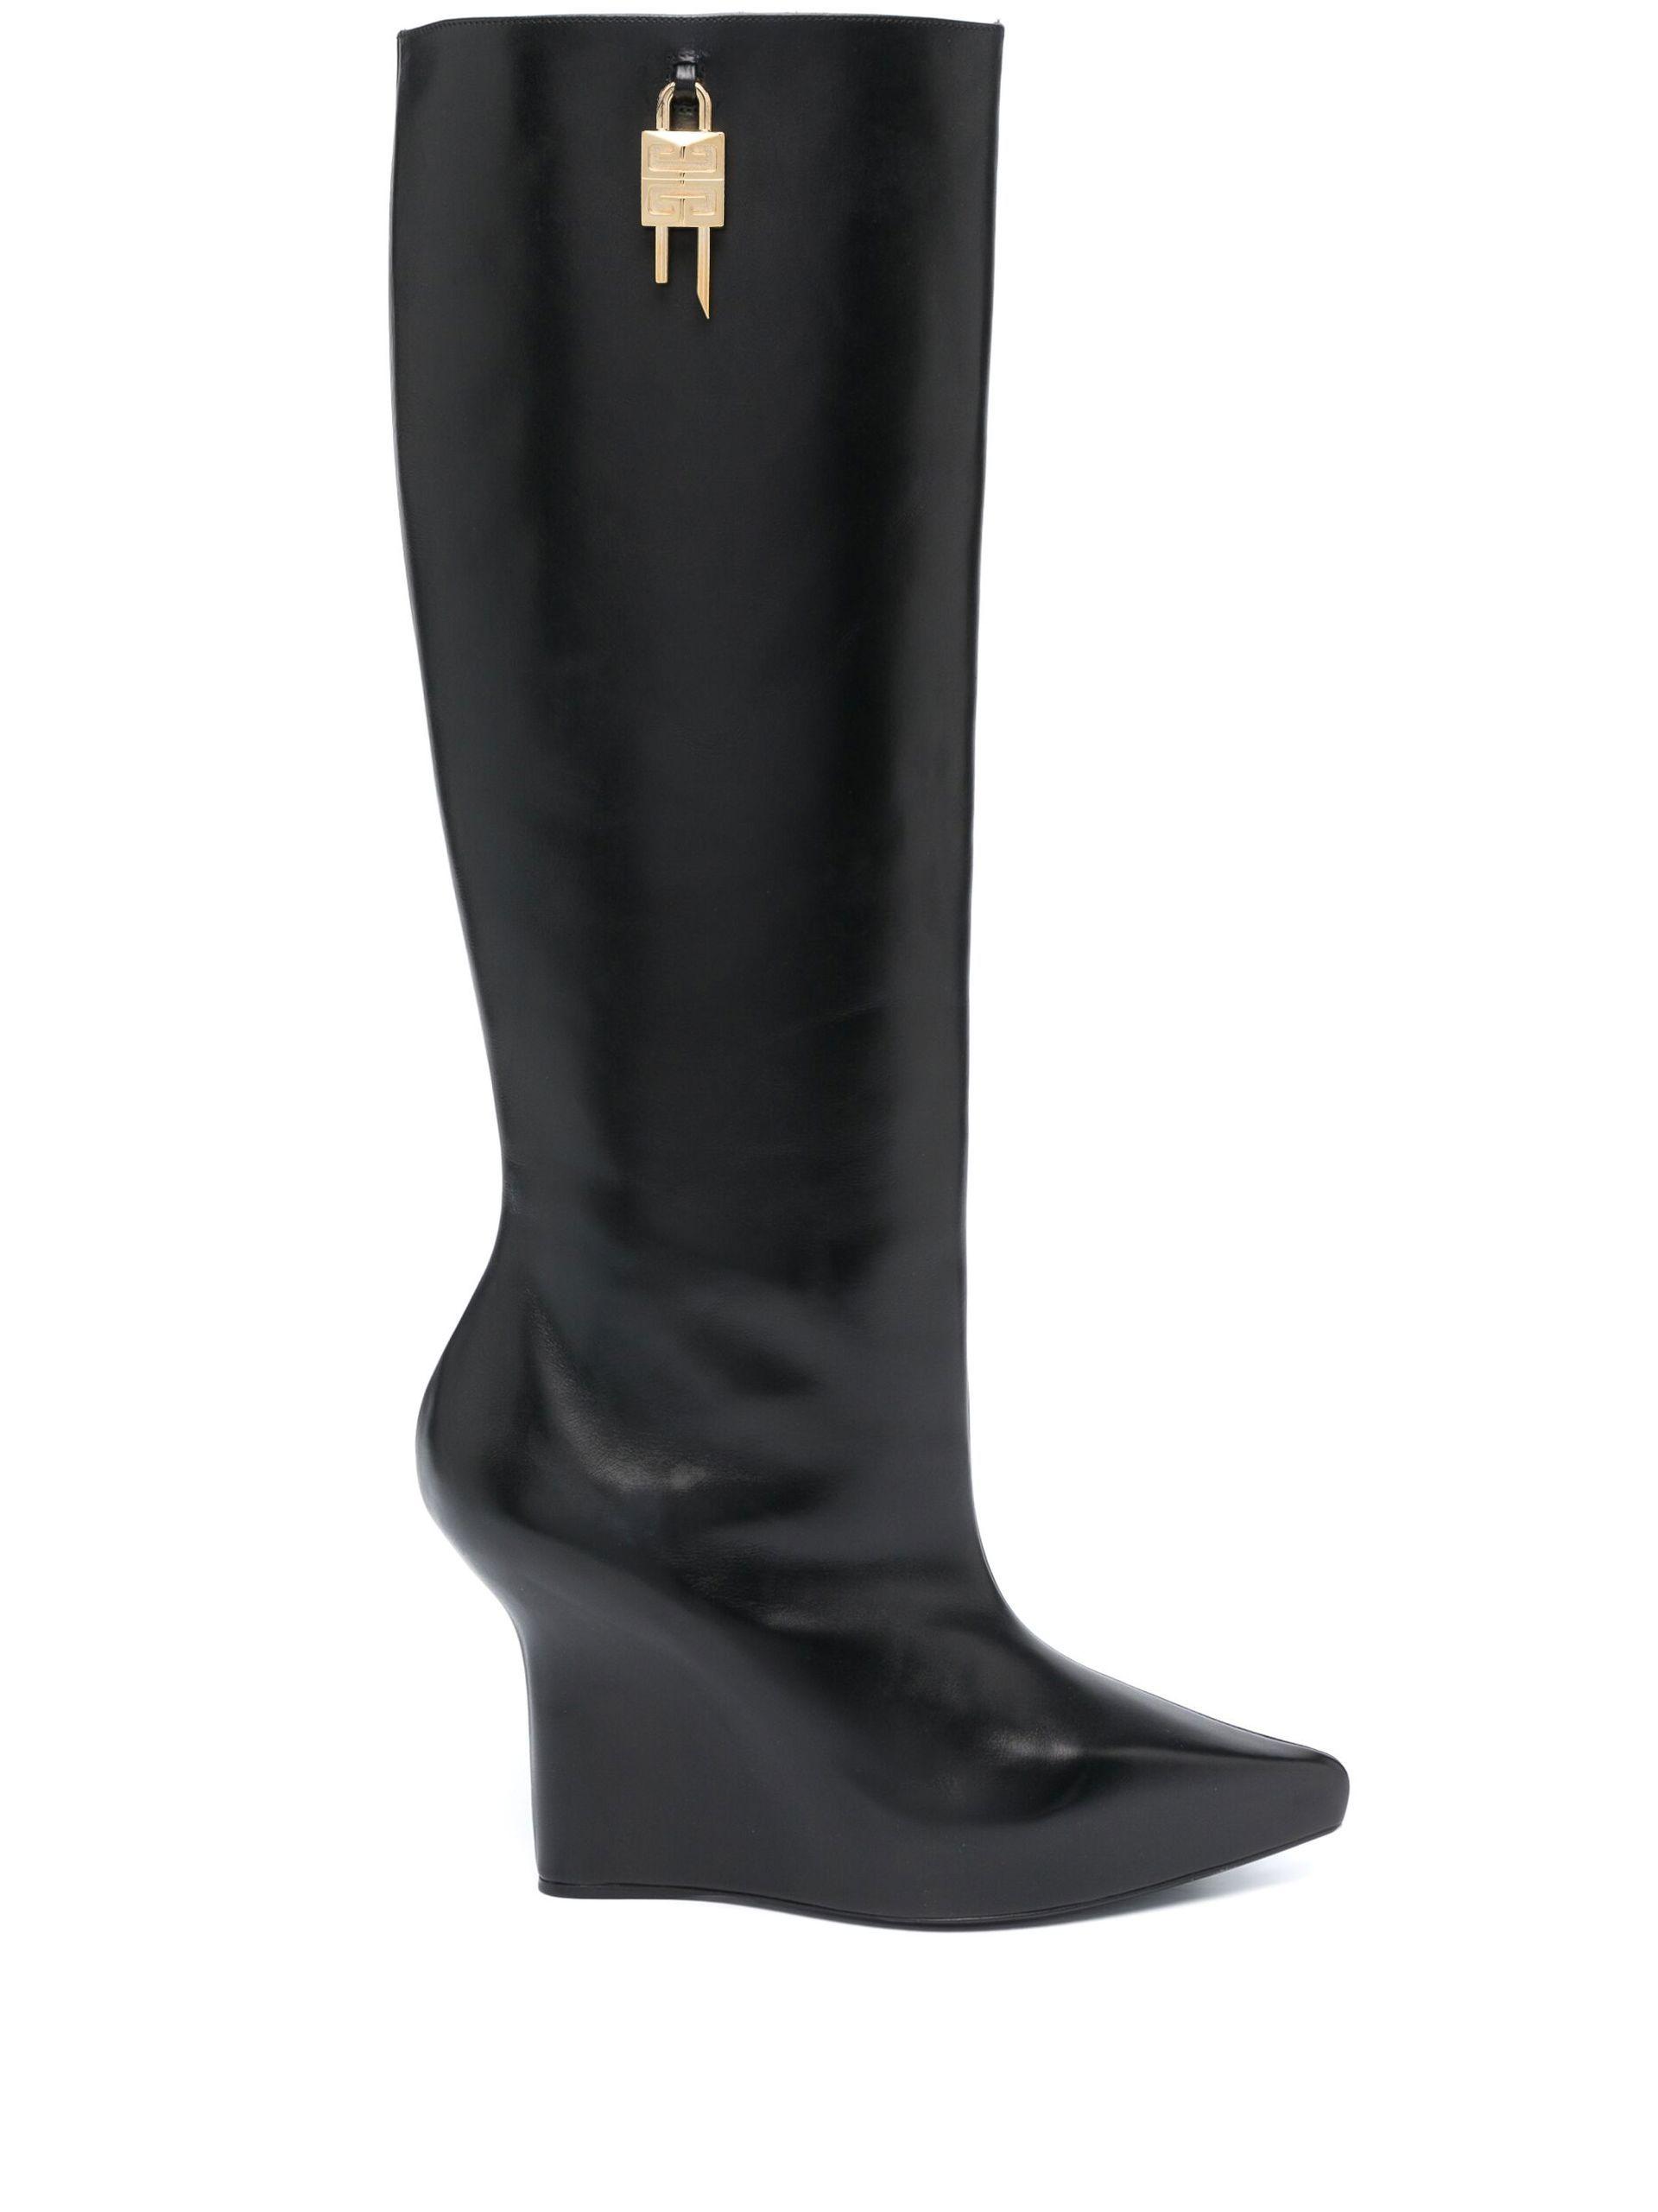 Givenchy G-lock 110 Wedge Knee-high Boots - Women's - Calf Leather in Black  | Lyst